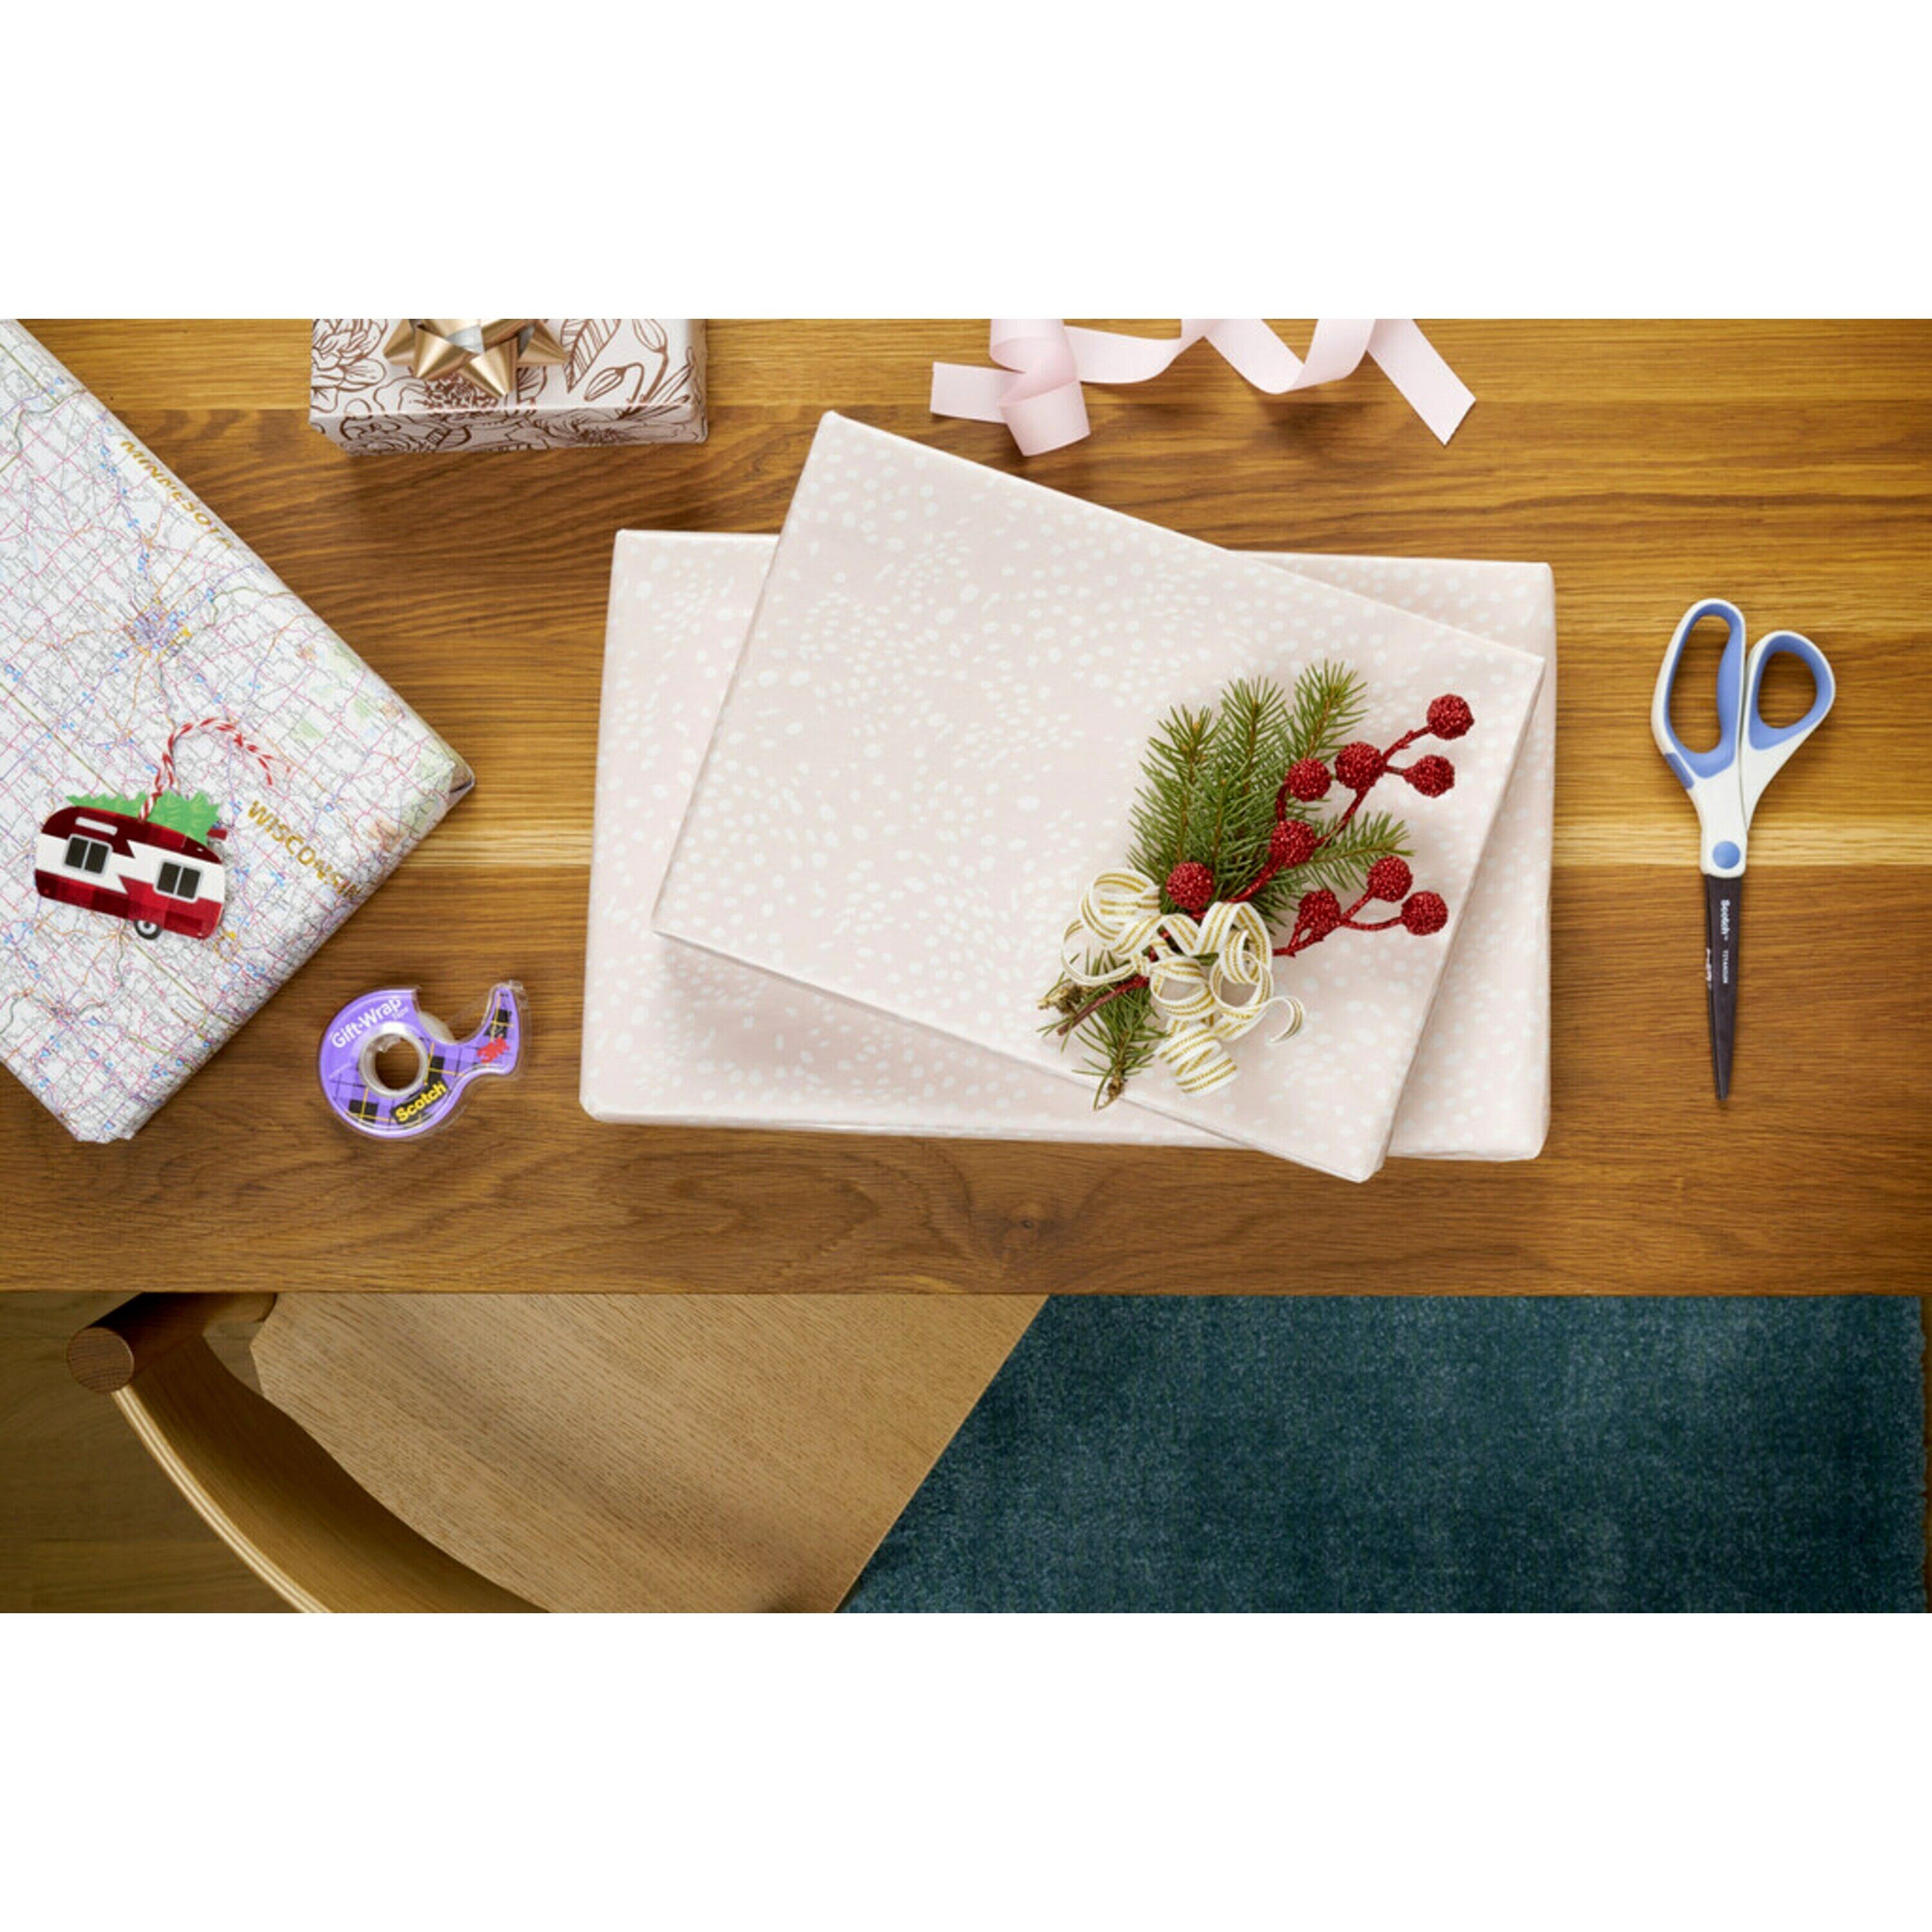 Four Easy Gift Wrapping Ideas for Seniors With Arthritis